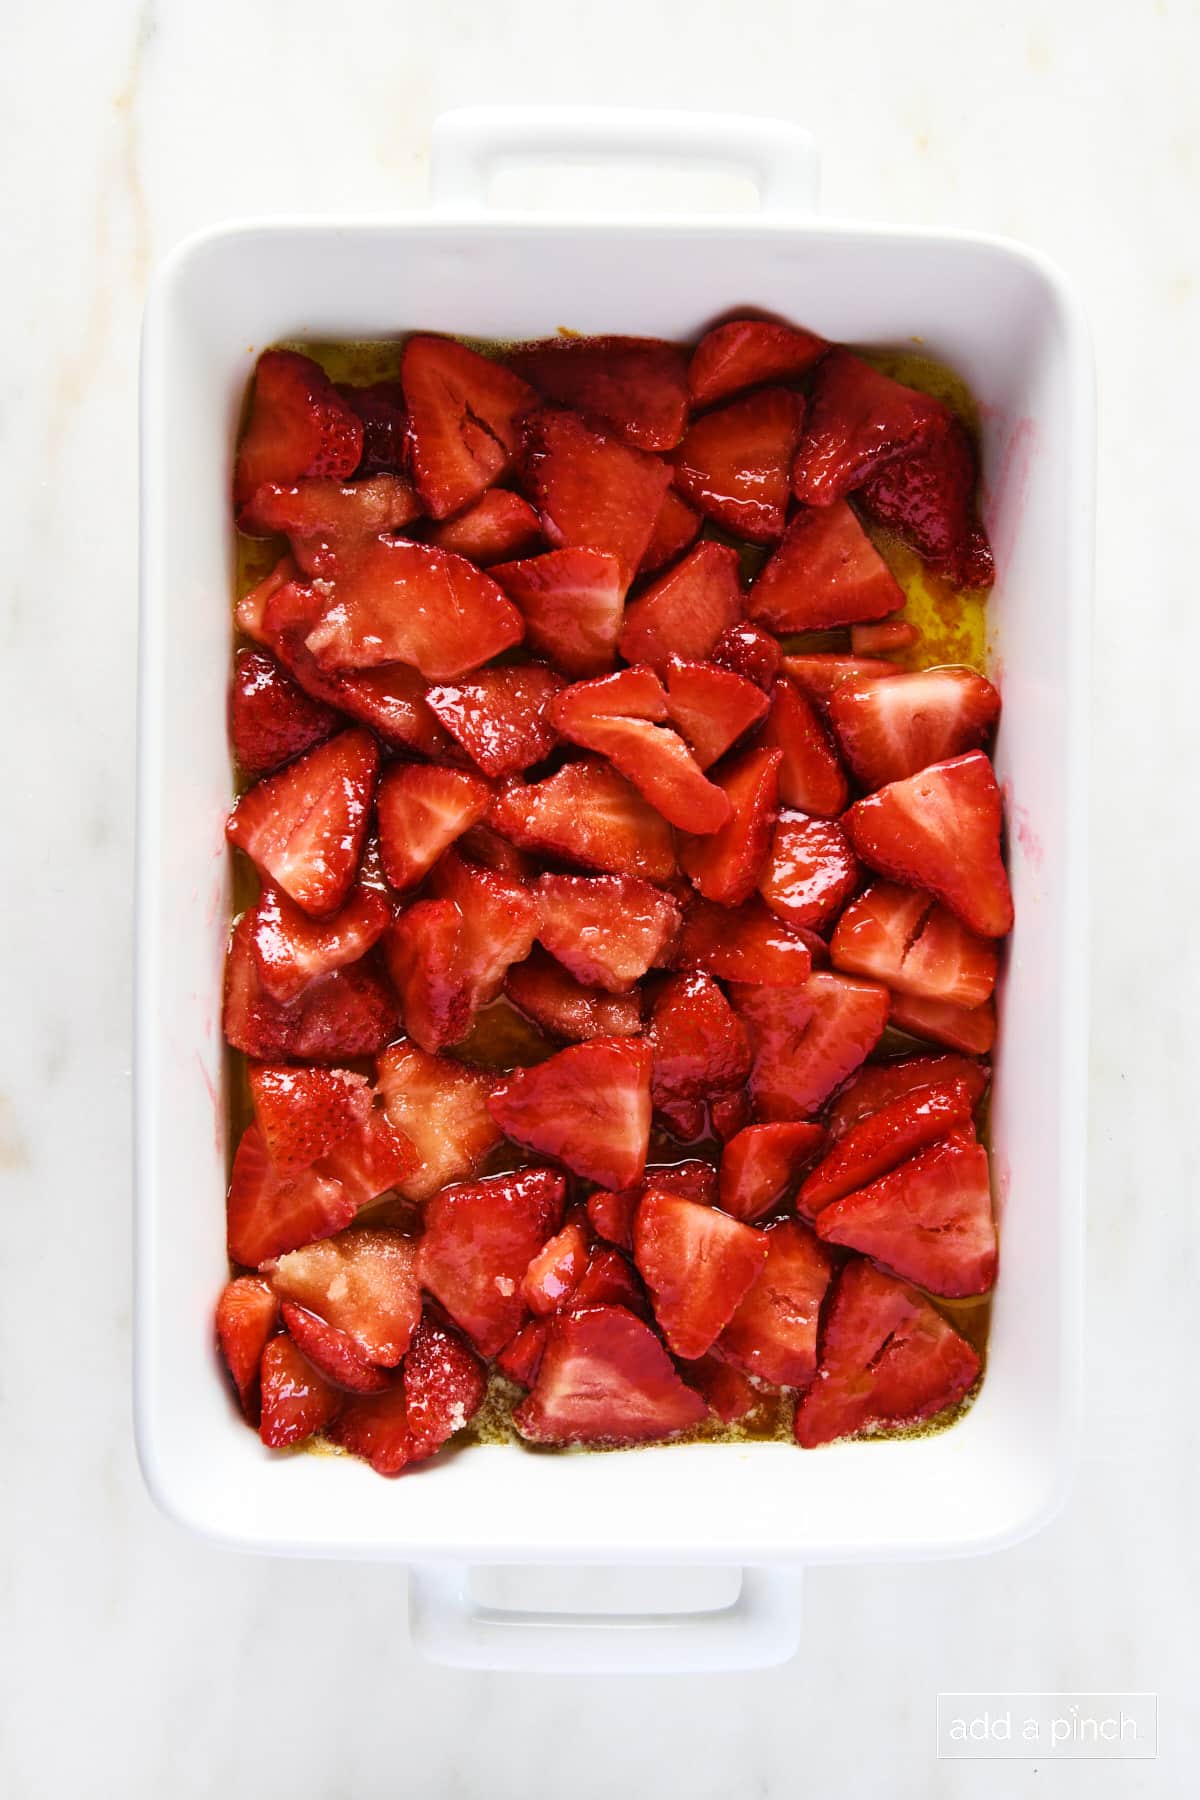 Sliced strawberries poured over butter in a white baking dish